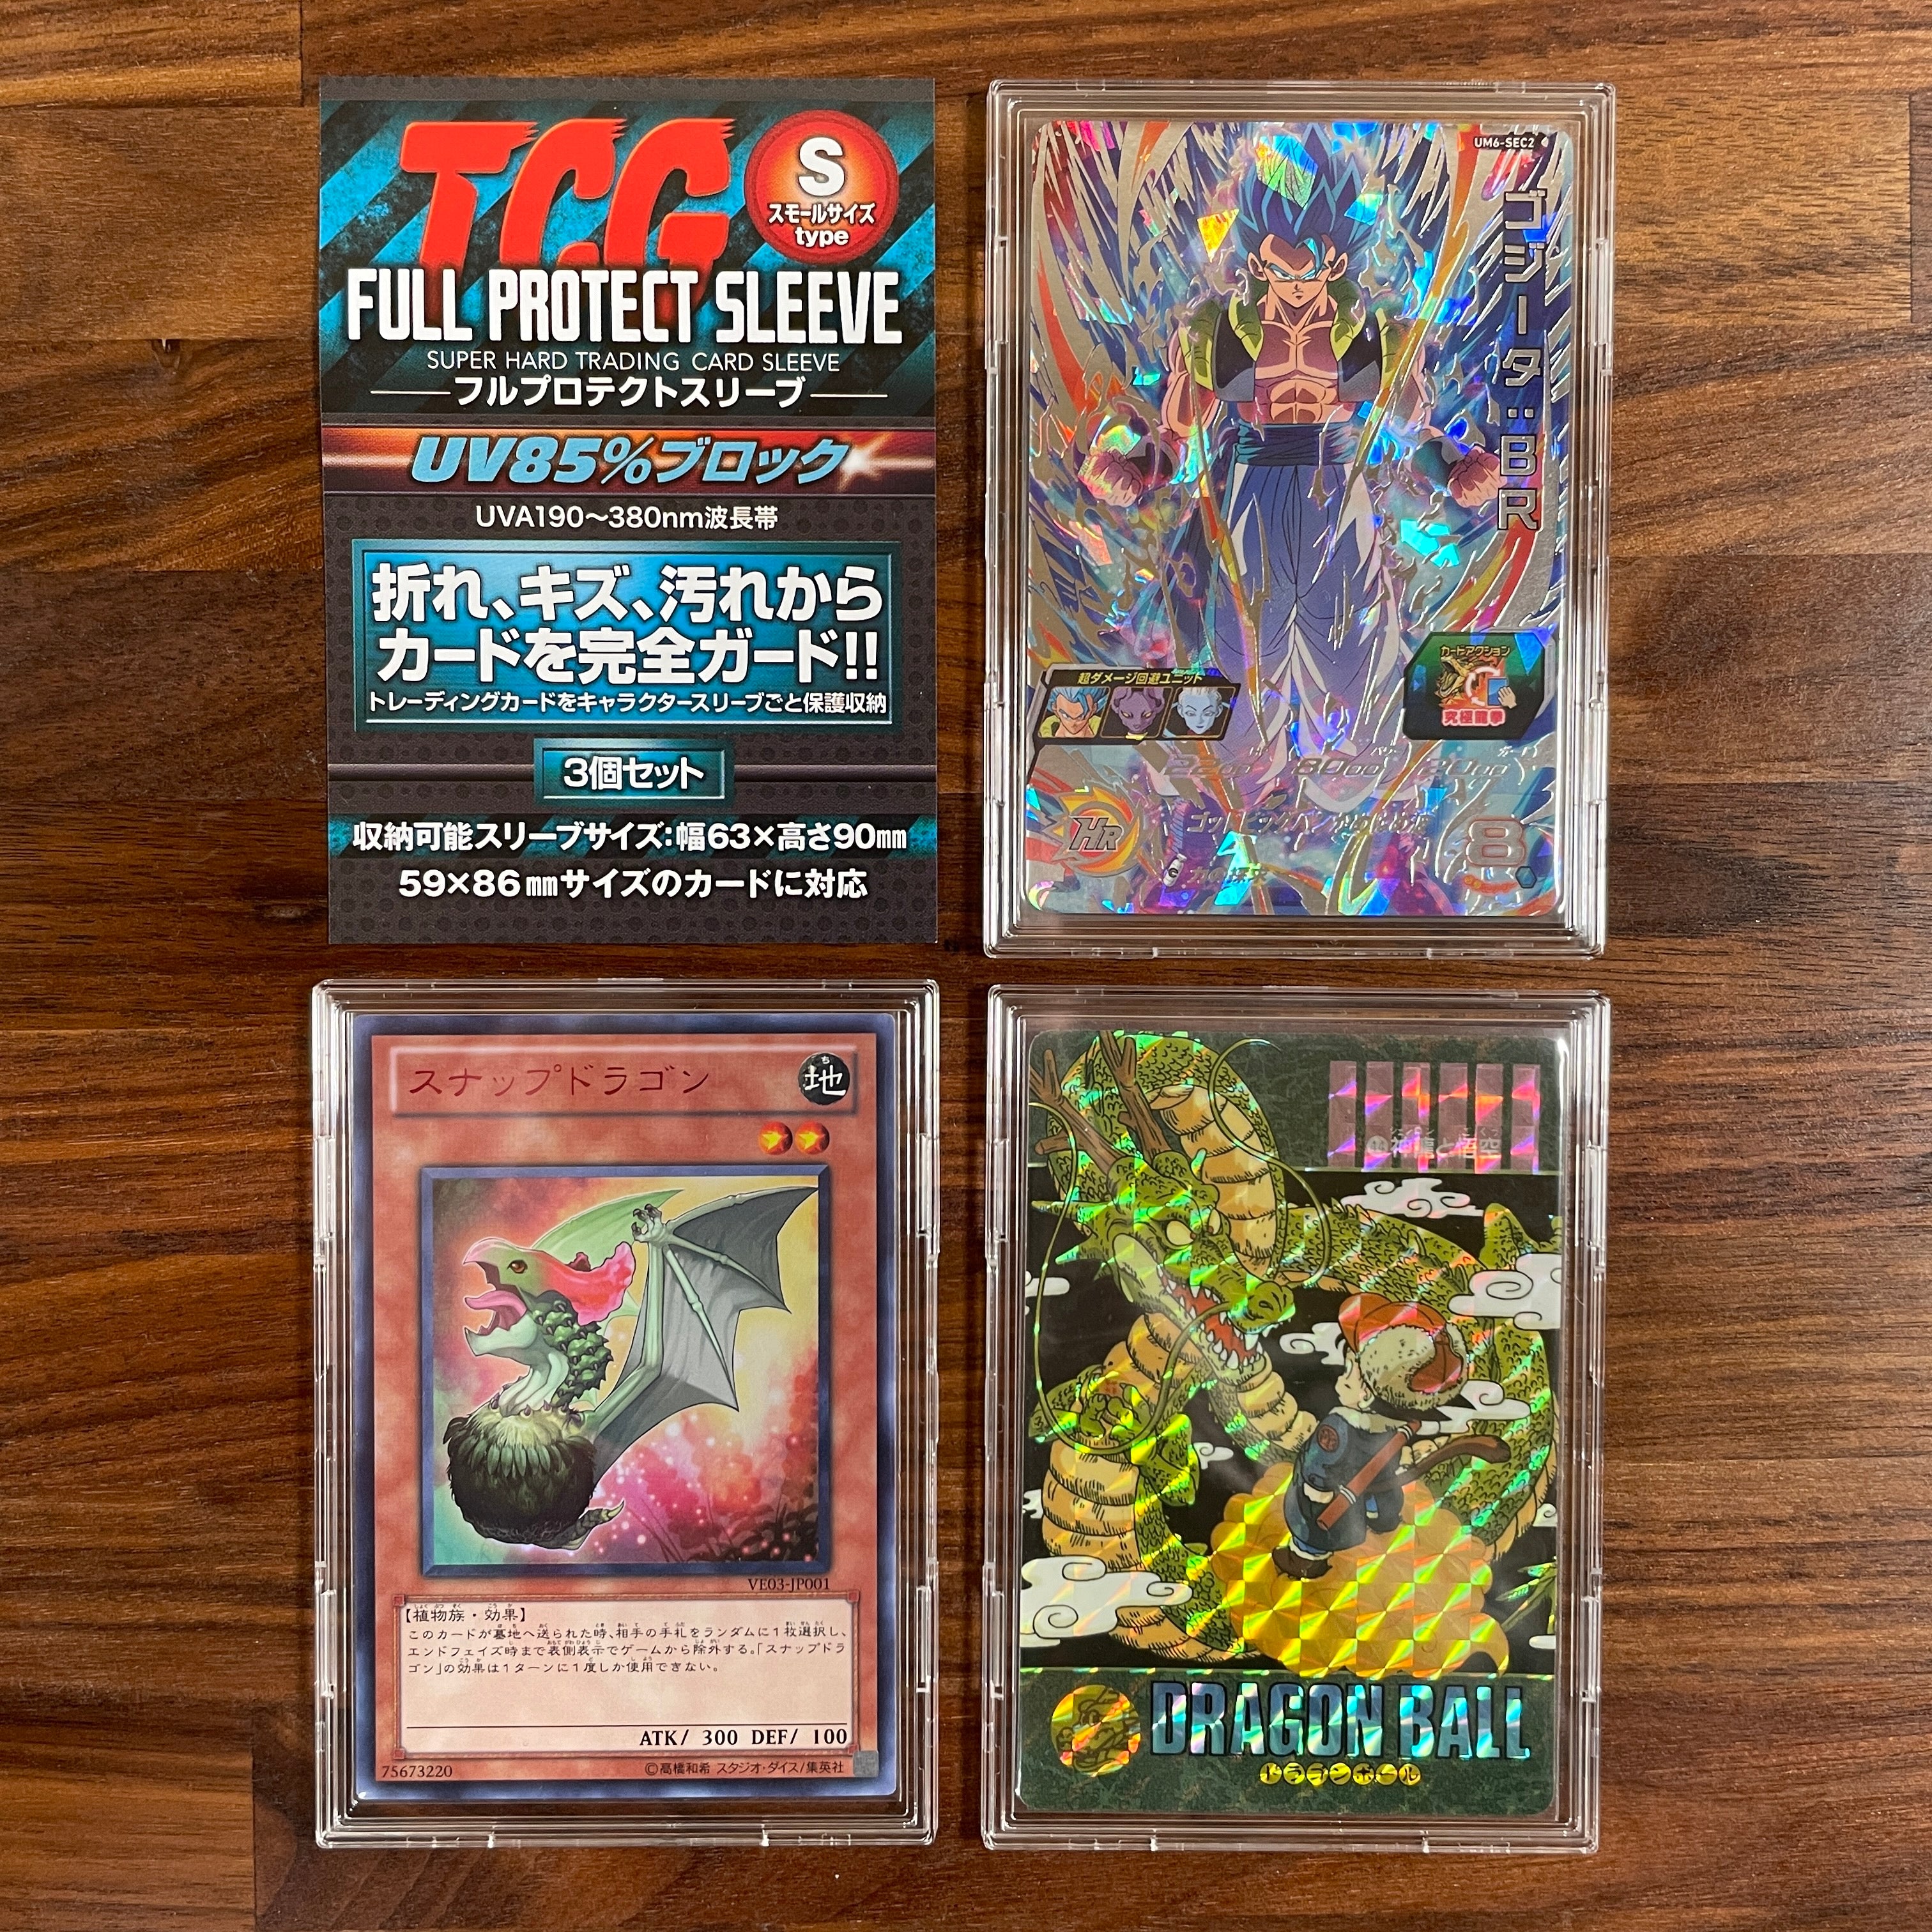  FULL PROTECT SLEEVE SUPER HARD TRADING CARD SLEEVE Small size type (set of 3)